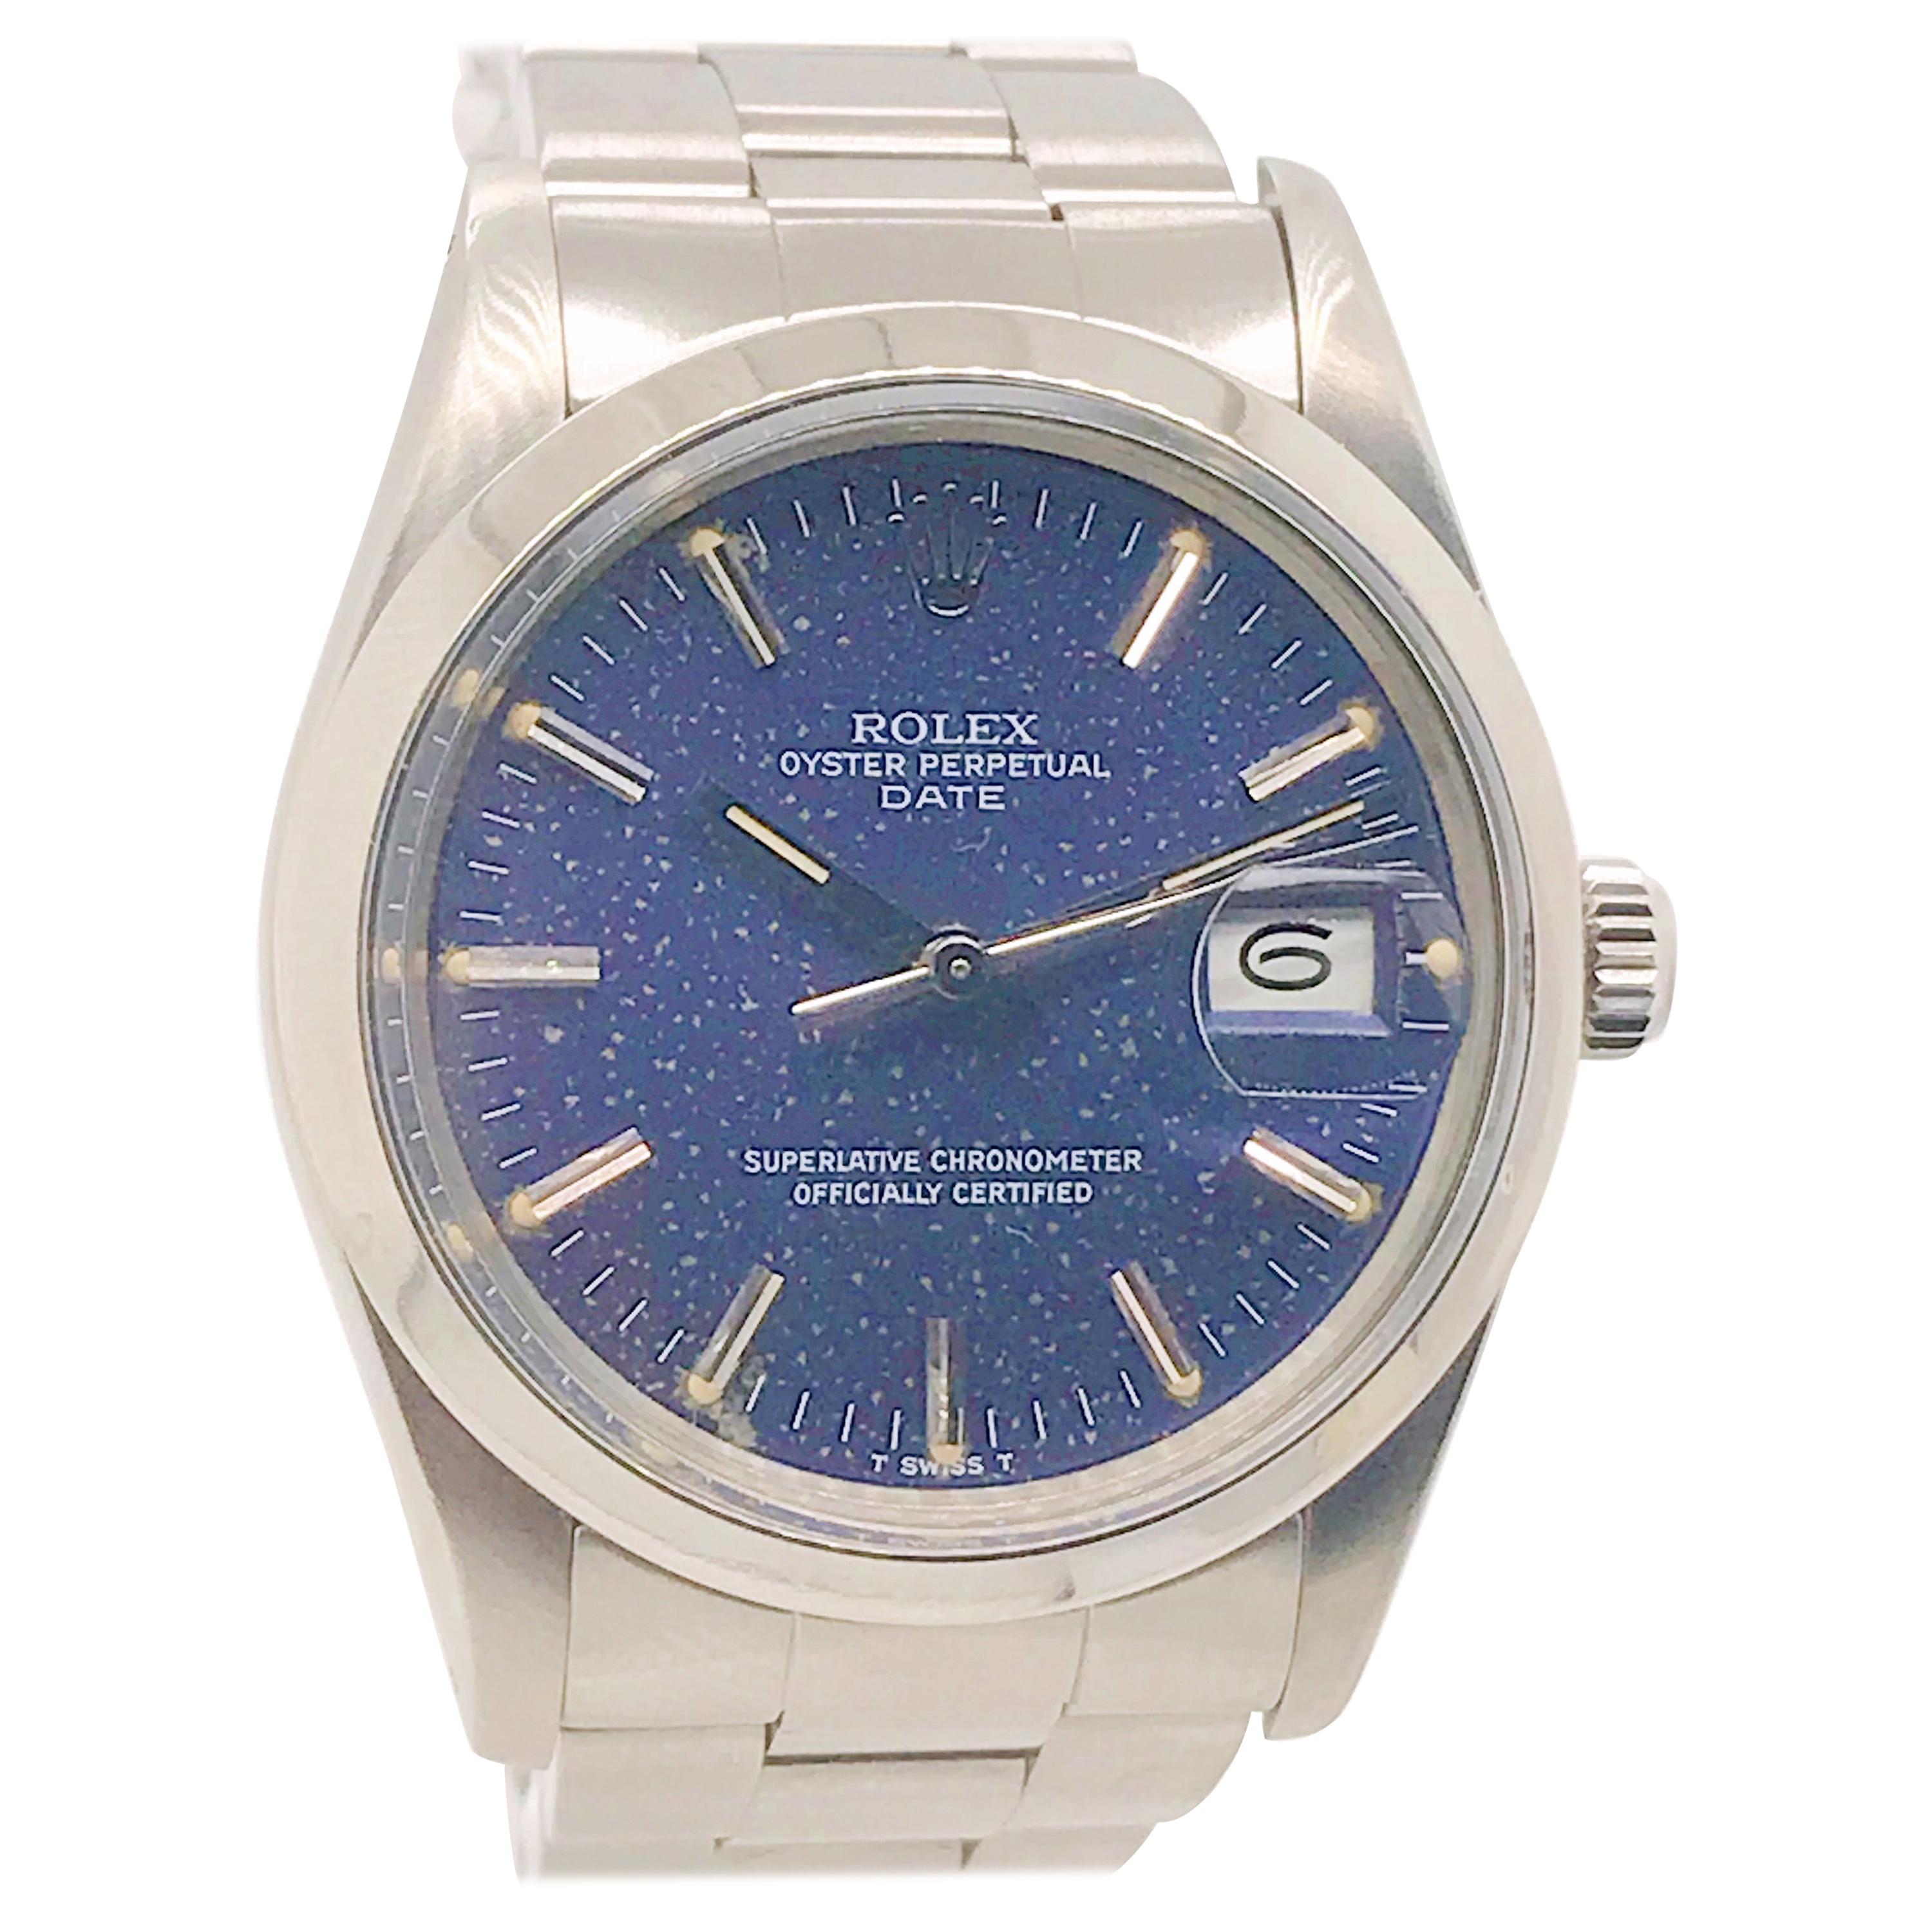 Rolex Date with Blue Speckled Dial and Stainless Oyster Bracelet, circa 1981